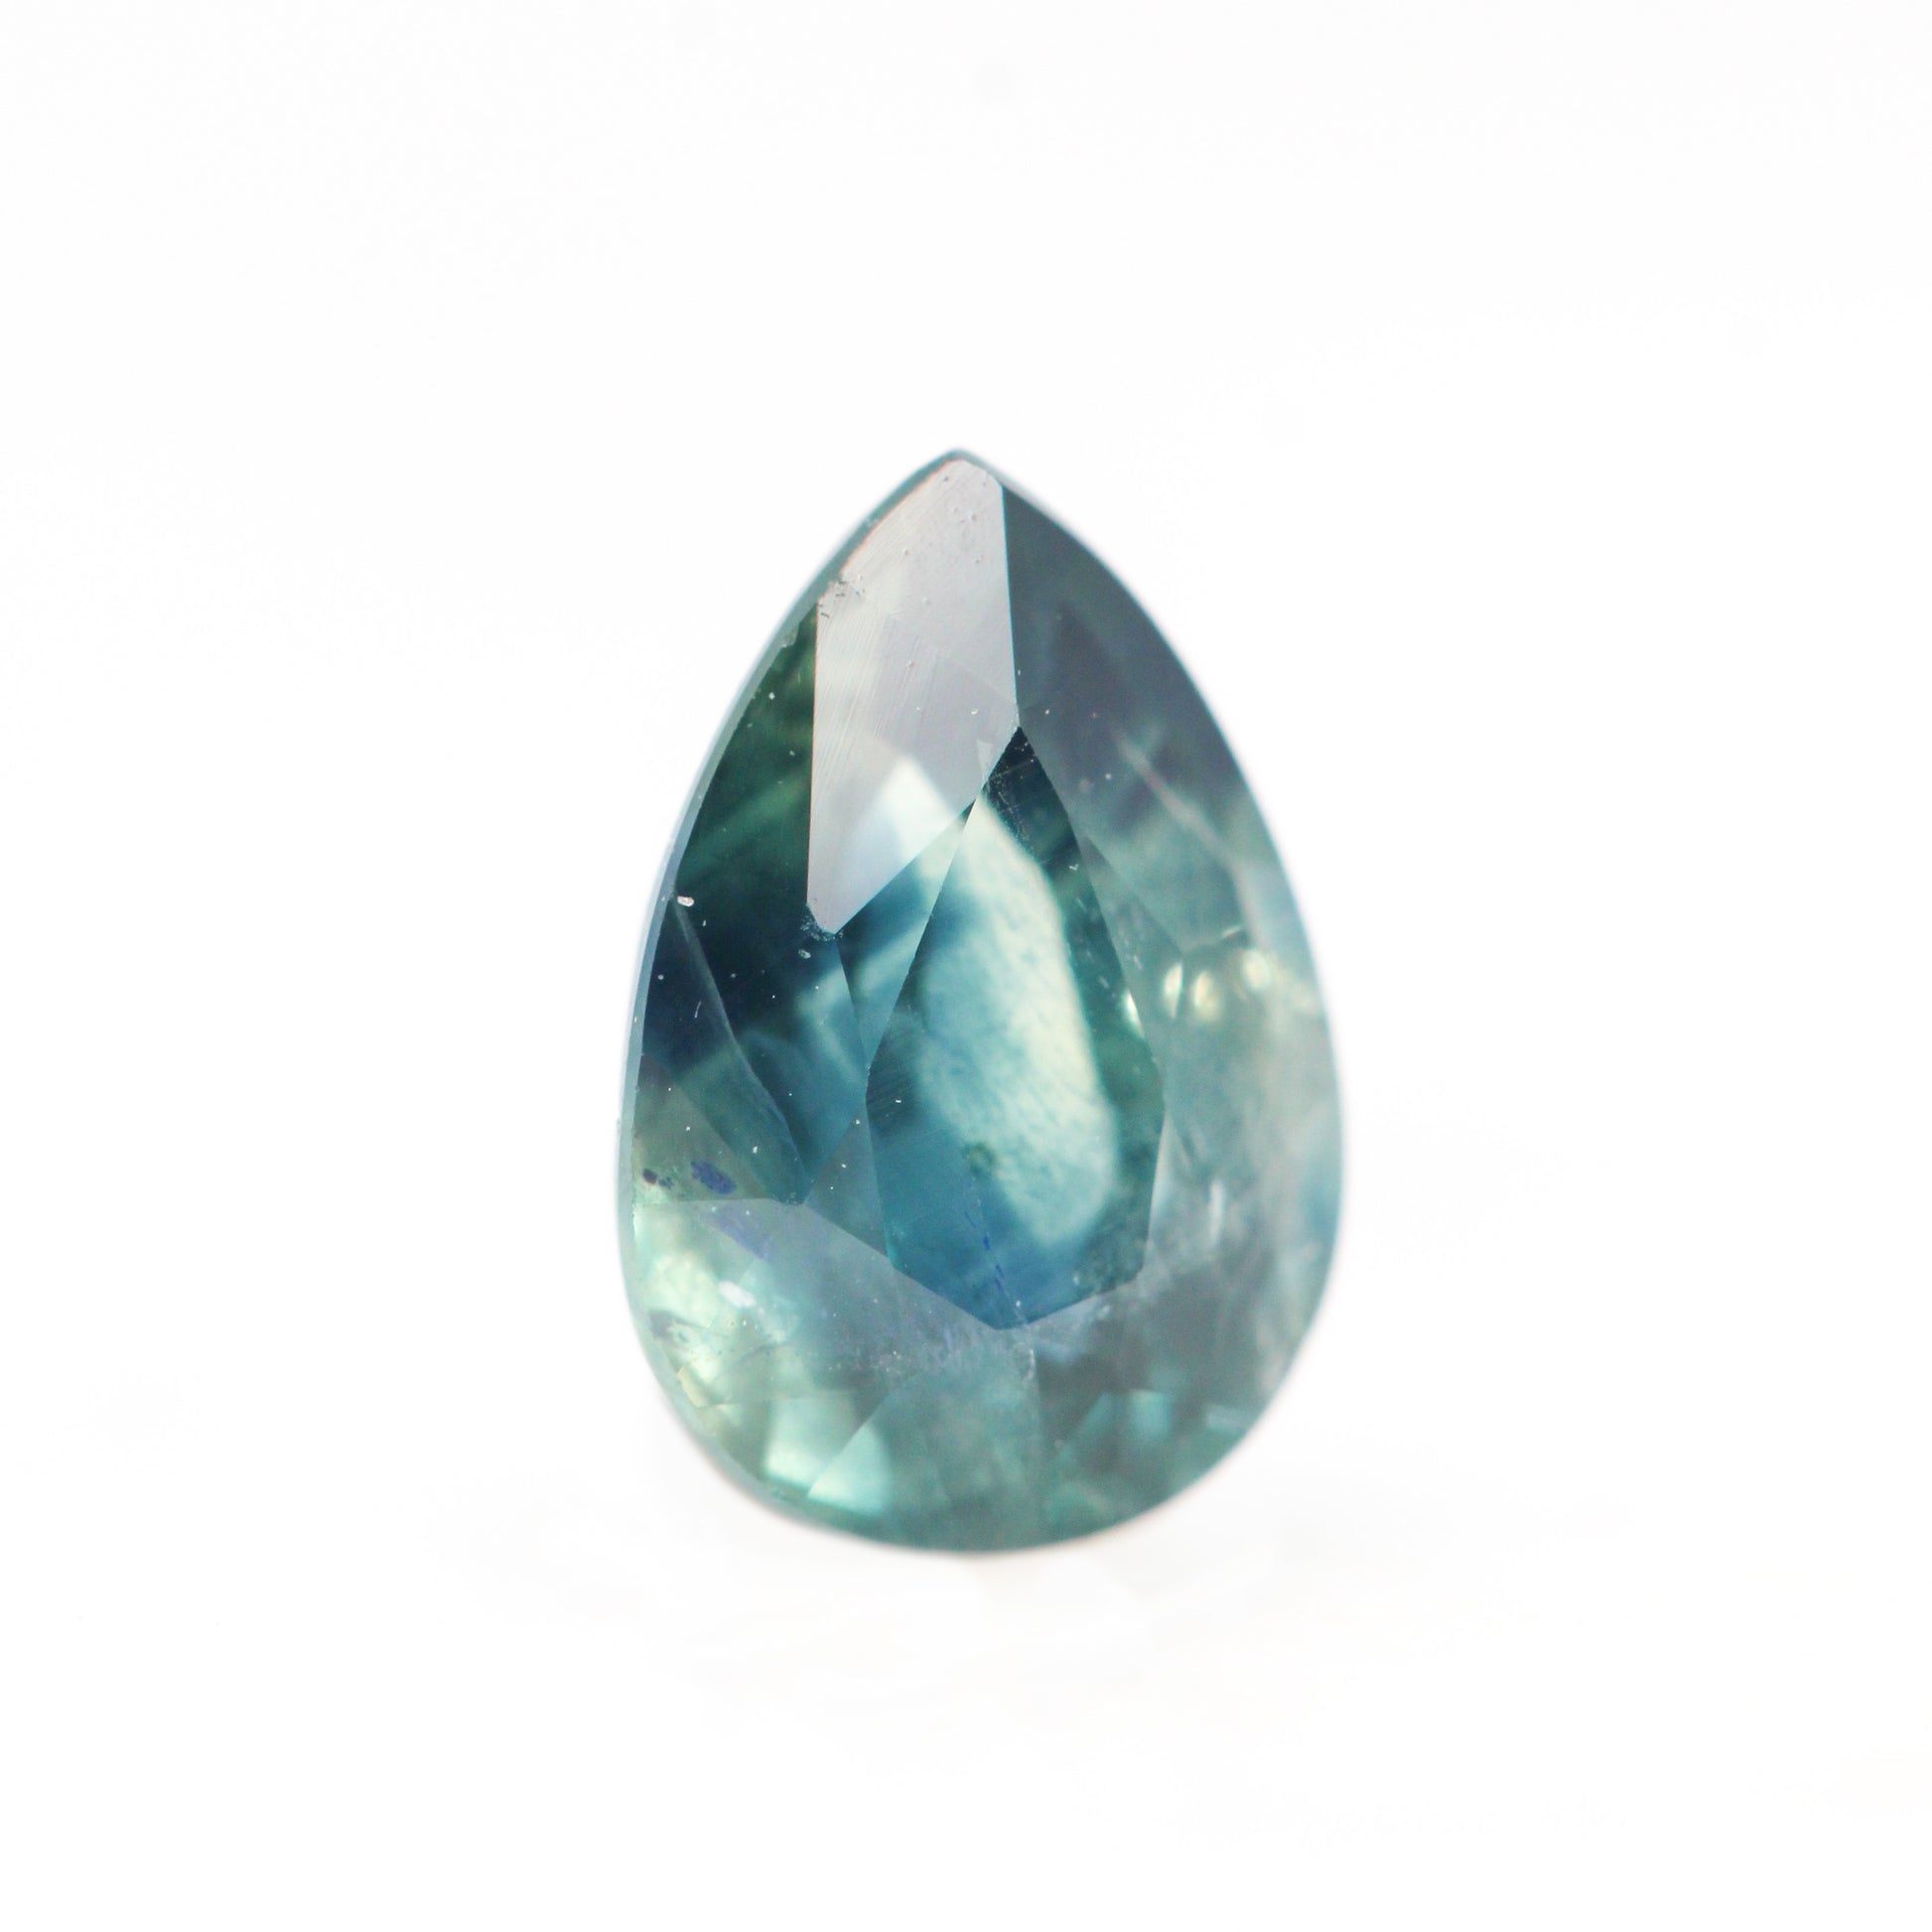 1.10 Carat Light Teal Pear Sapphire for Custom Work - Inventory Code LTPS110 - Midwinter Co. Alternative Bridal Rings and Modern Fine Jewelry